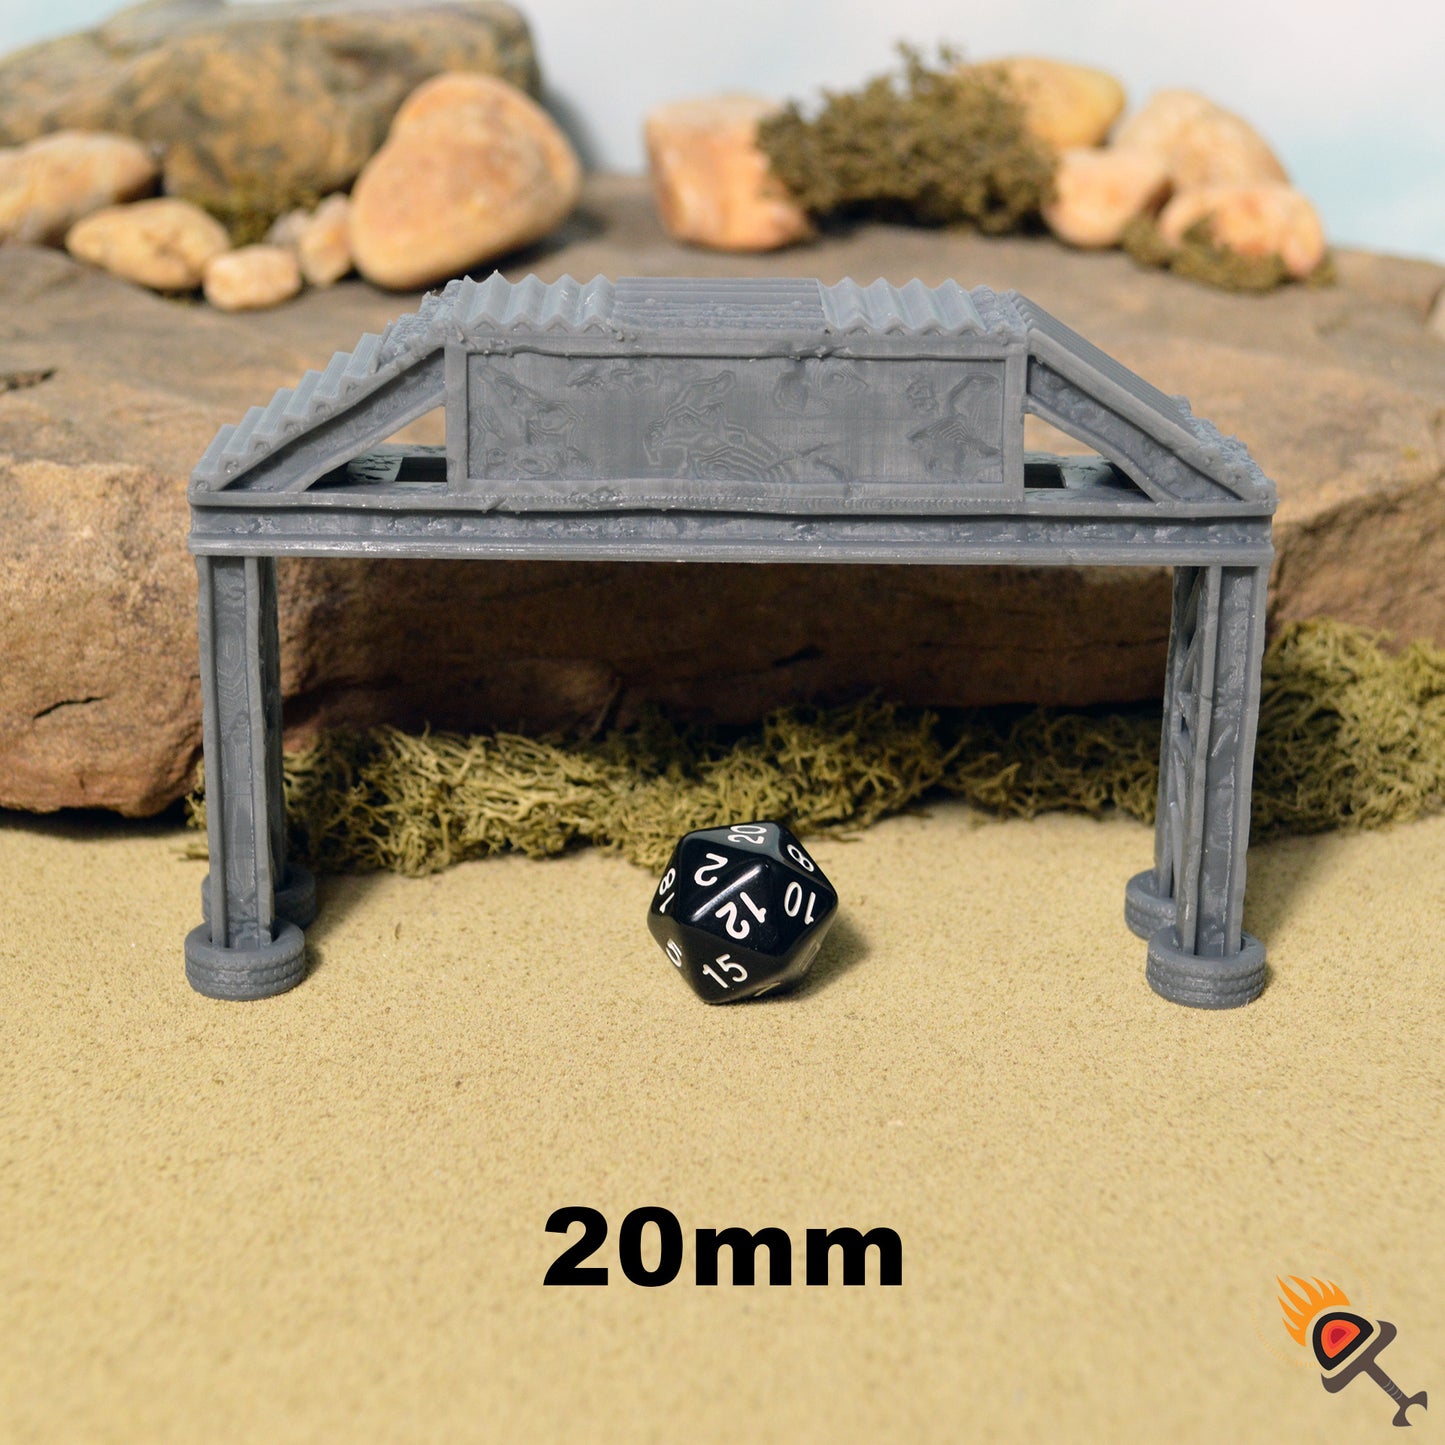 Gaslands Checkpoints Set of 4 for Gaslands Terrain 15mm 20mm 28mm 32mm, Fallout Urban Post Apocalyptic Race Track, Gift for Tabletop Gamers